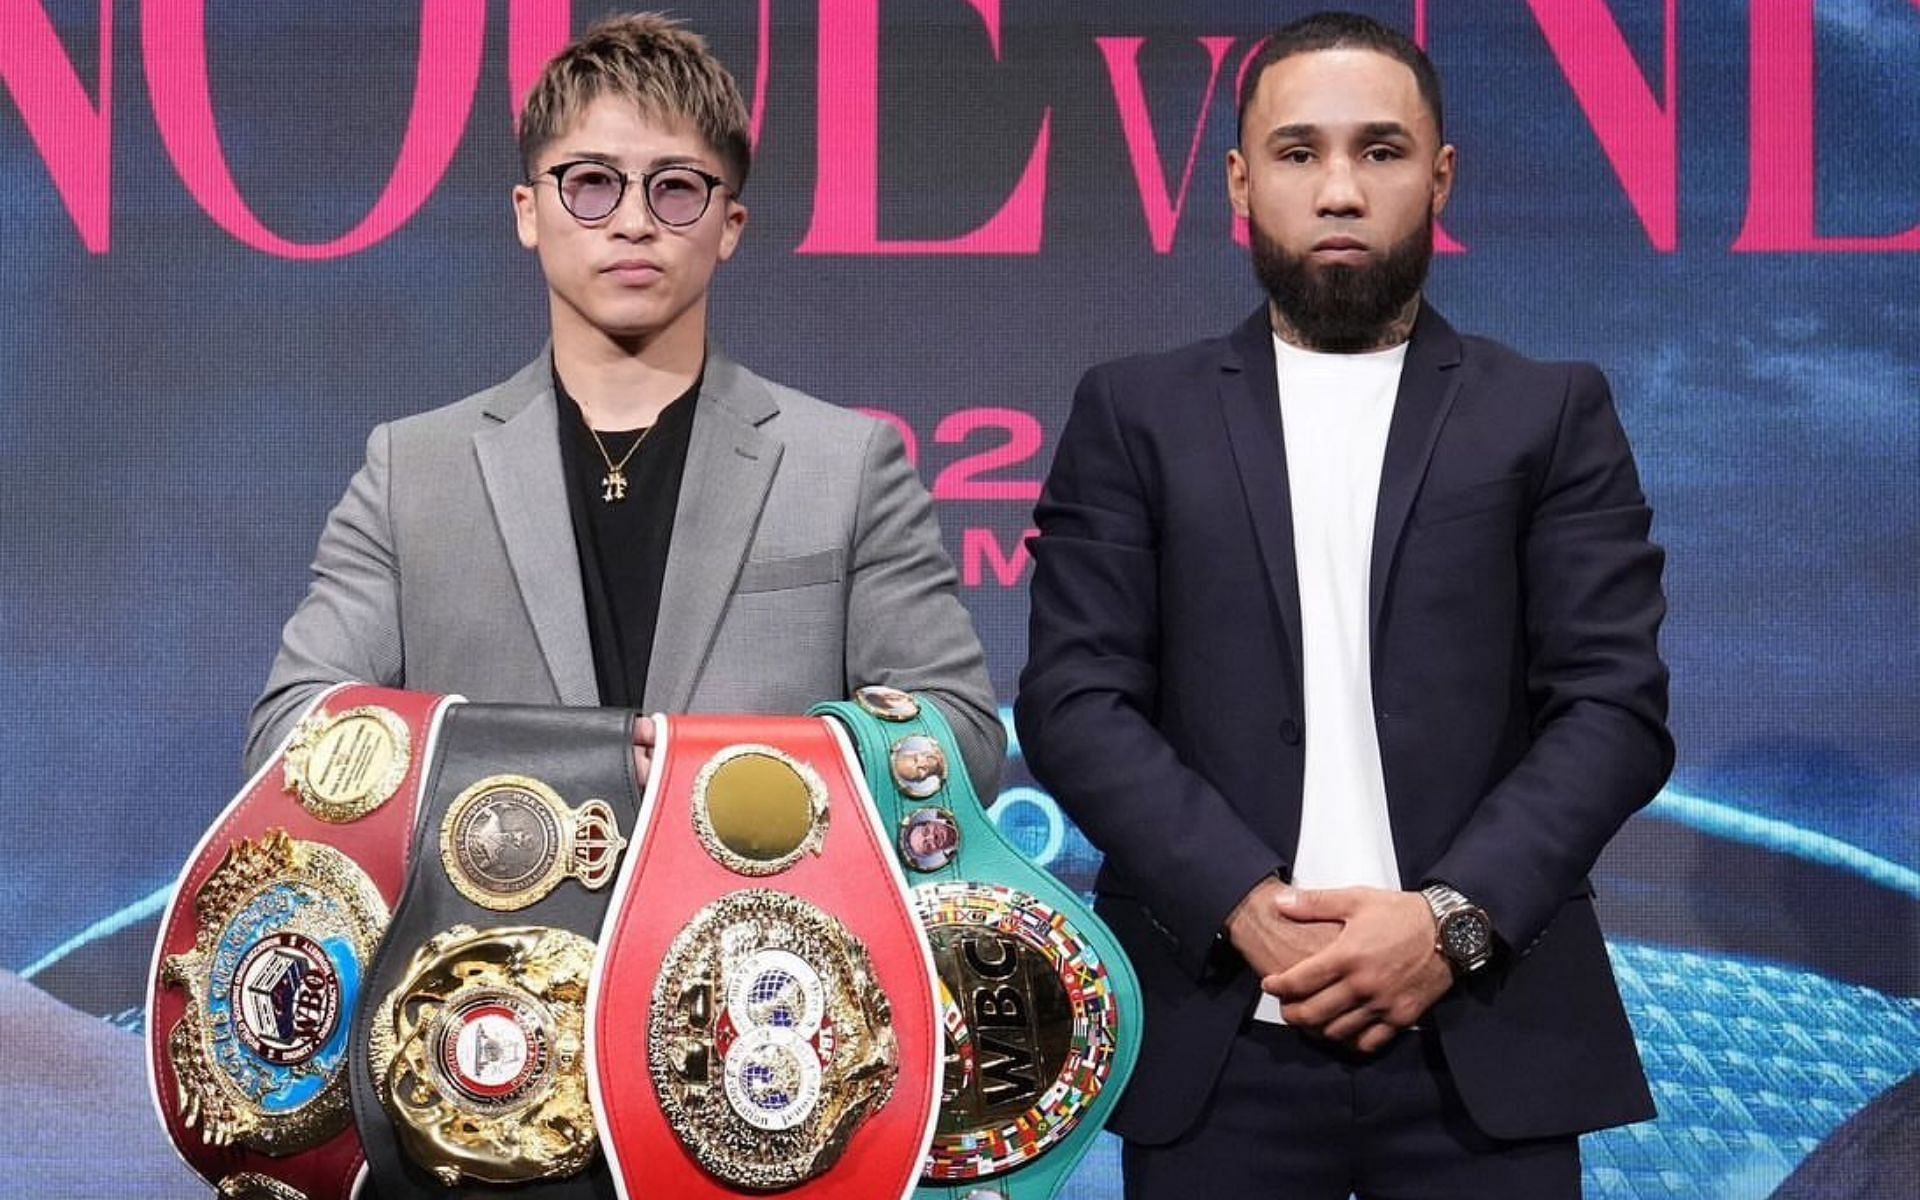 Naoya Inoue (left) will fight Luis Nery (right) in Japan [Image courtesy: @naoyainoue_410 on Instagram]